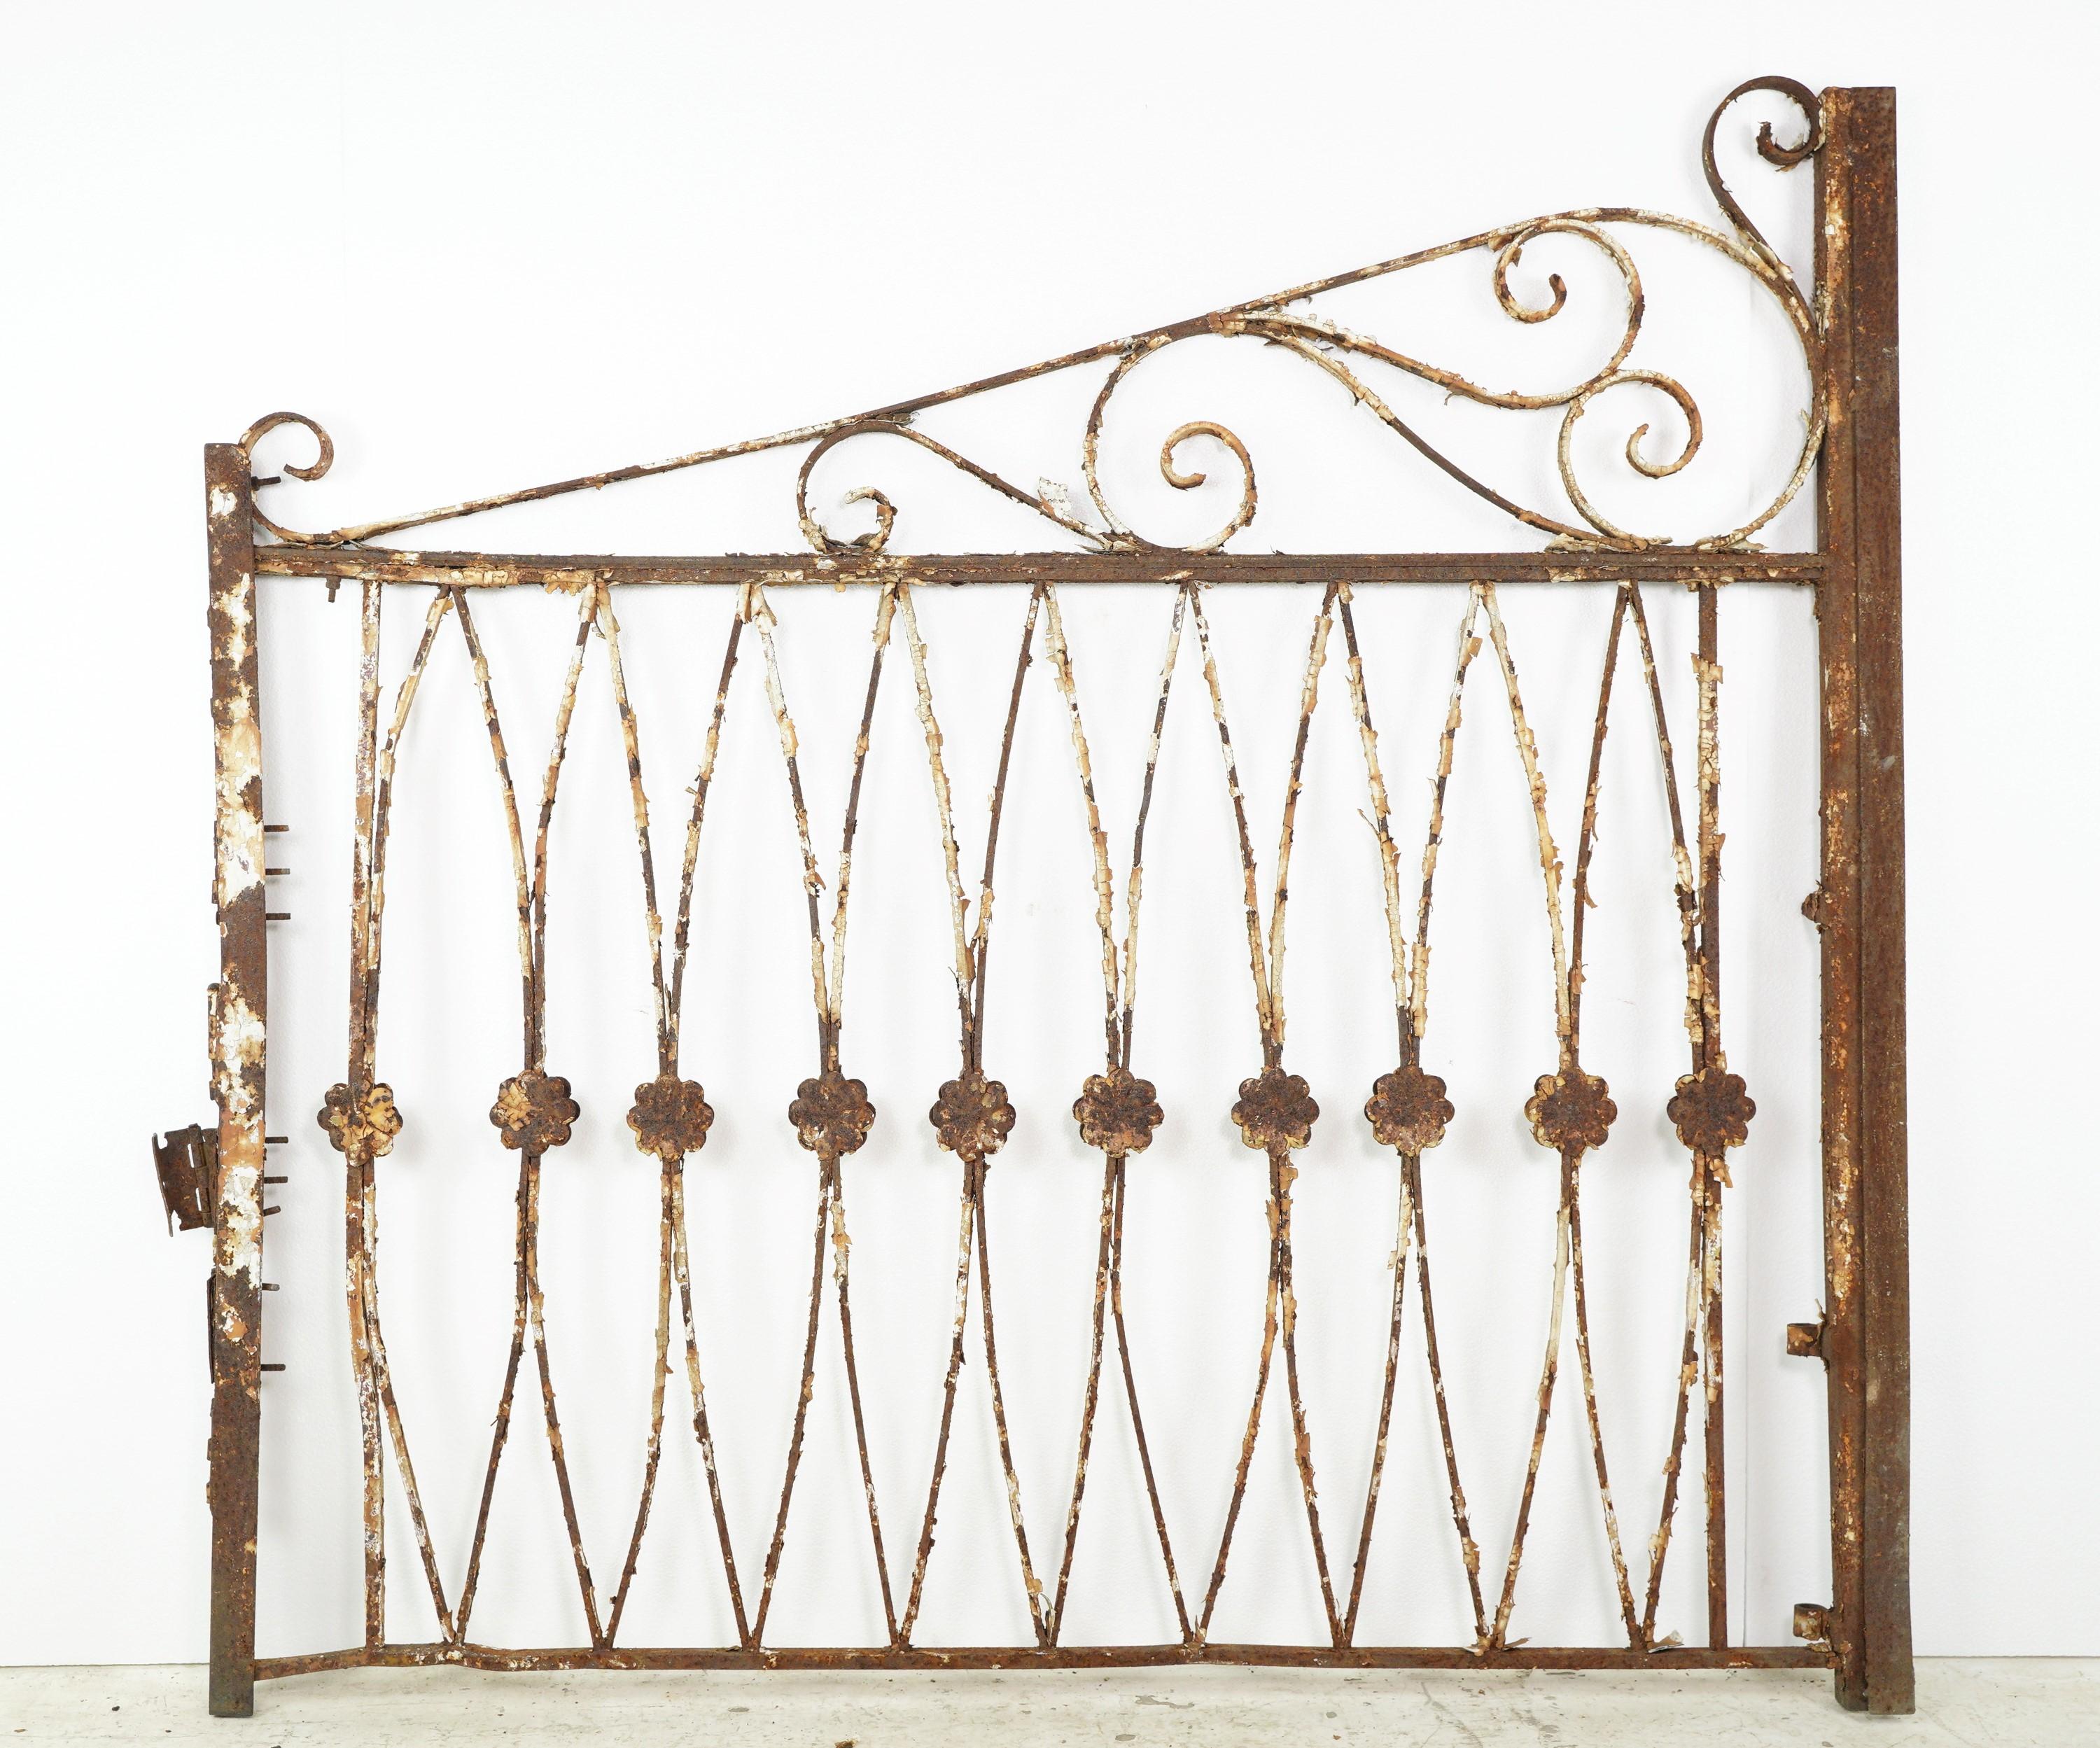 111 in. Ovals & Swirls Wrought Iron Double Driveway Gates For Sale 2